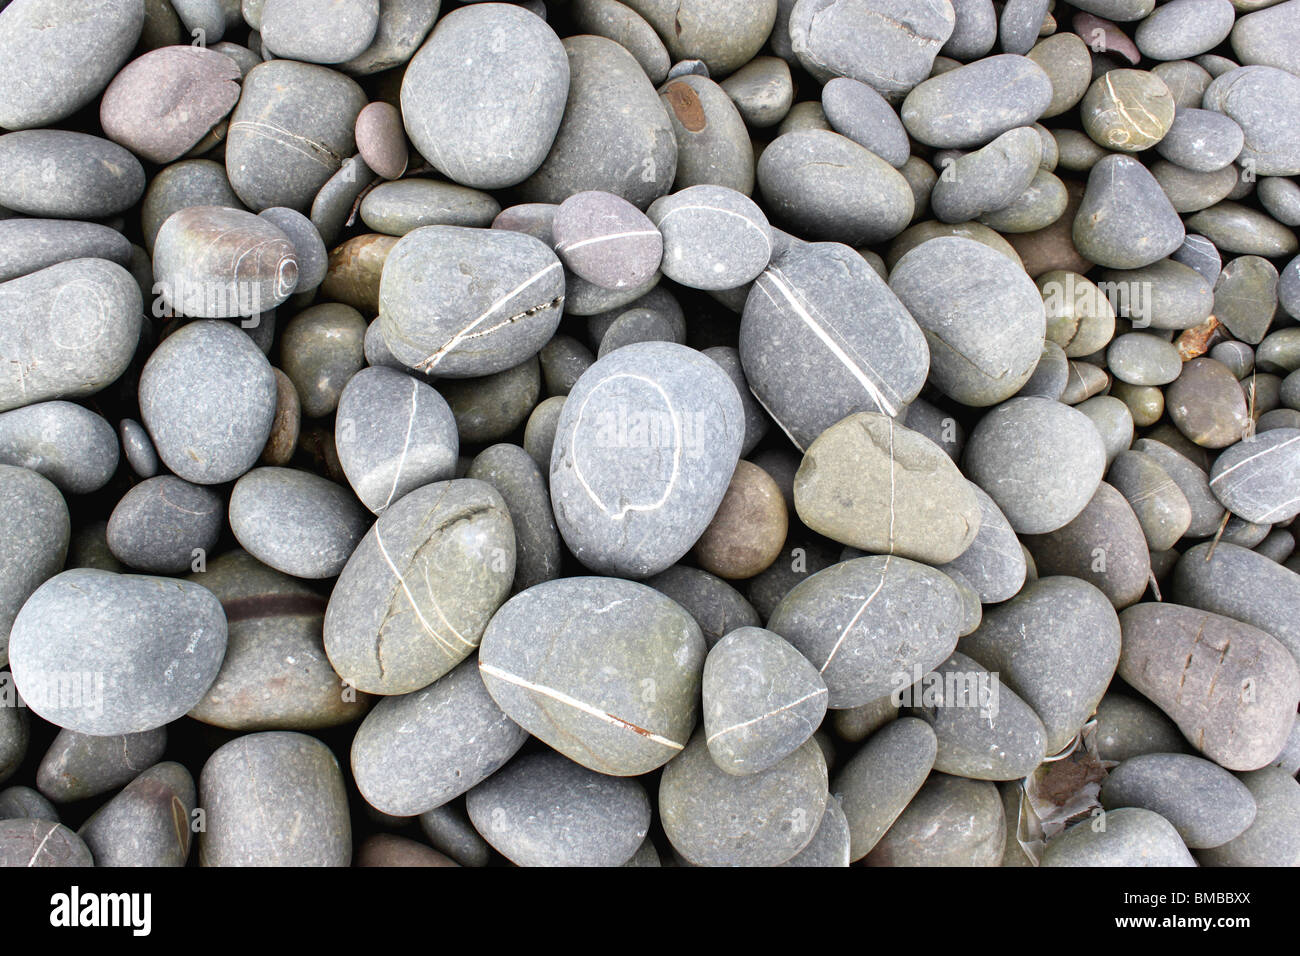 Pebbles on a beach with a white circle of stone within Stock Photo